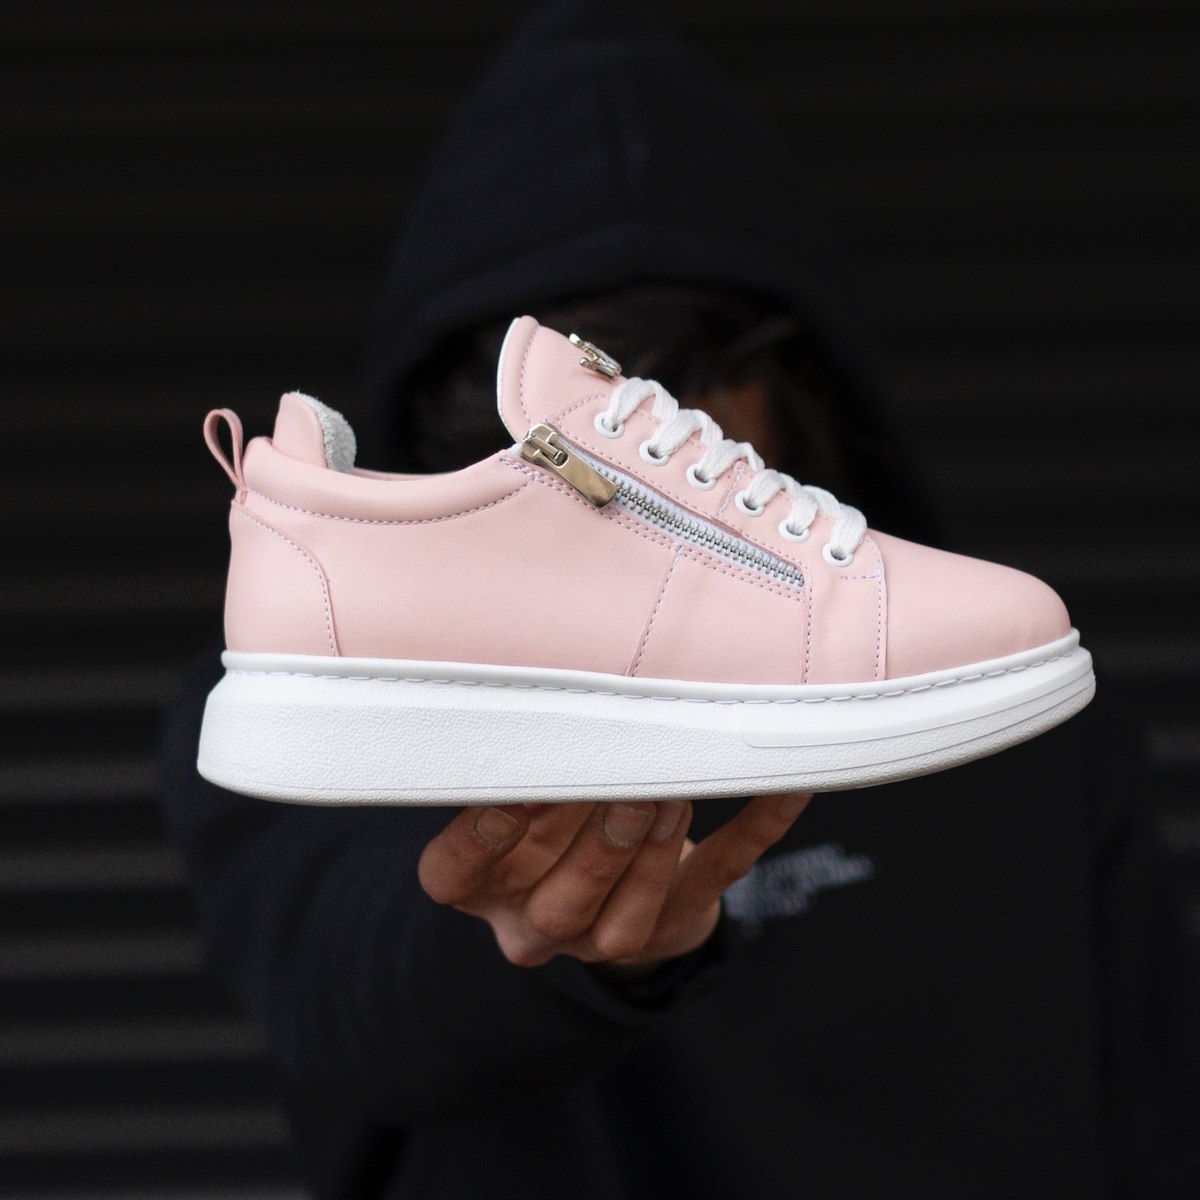 Woman Hype Sole Zipped Style Full Pink Sneakers - 3